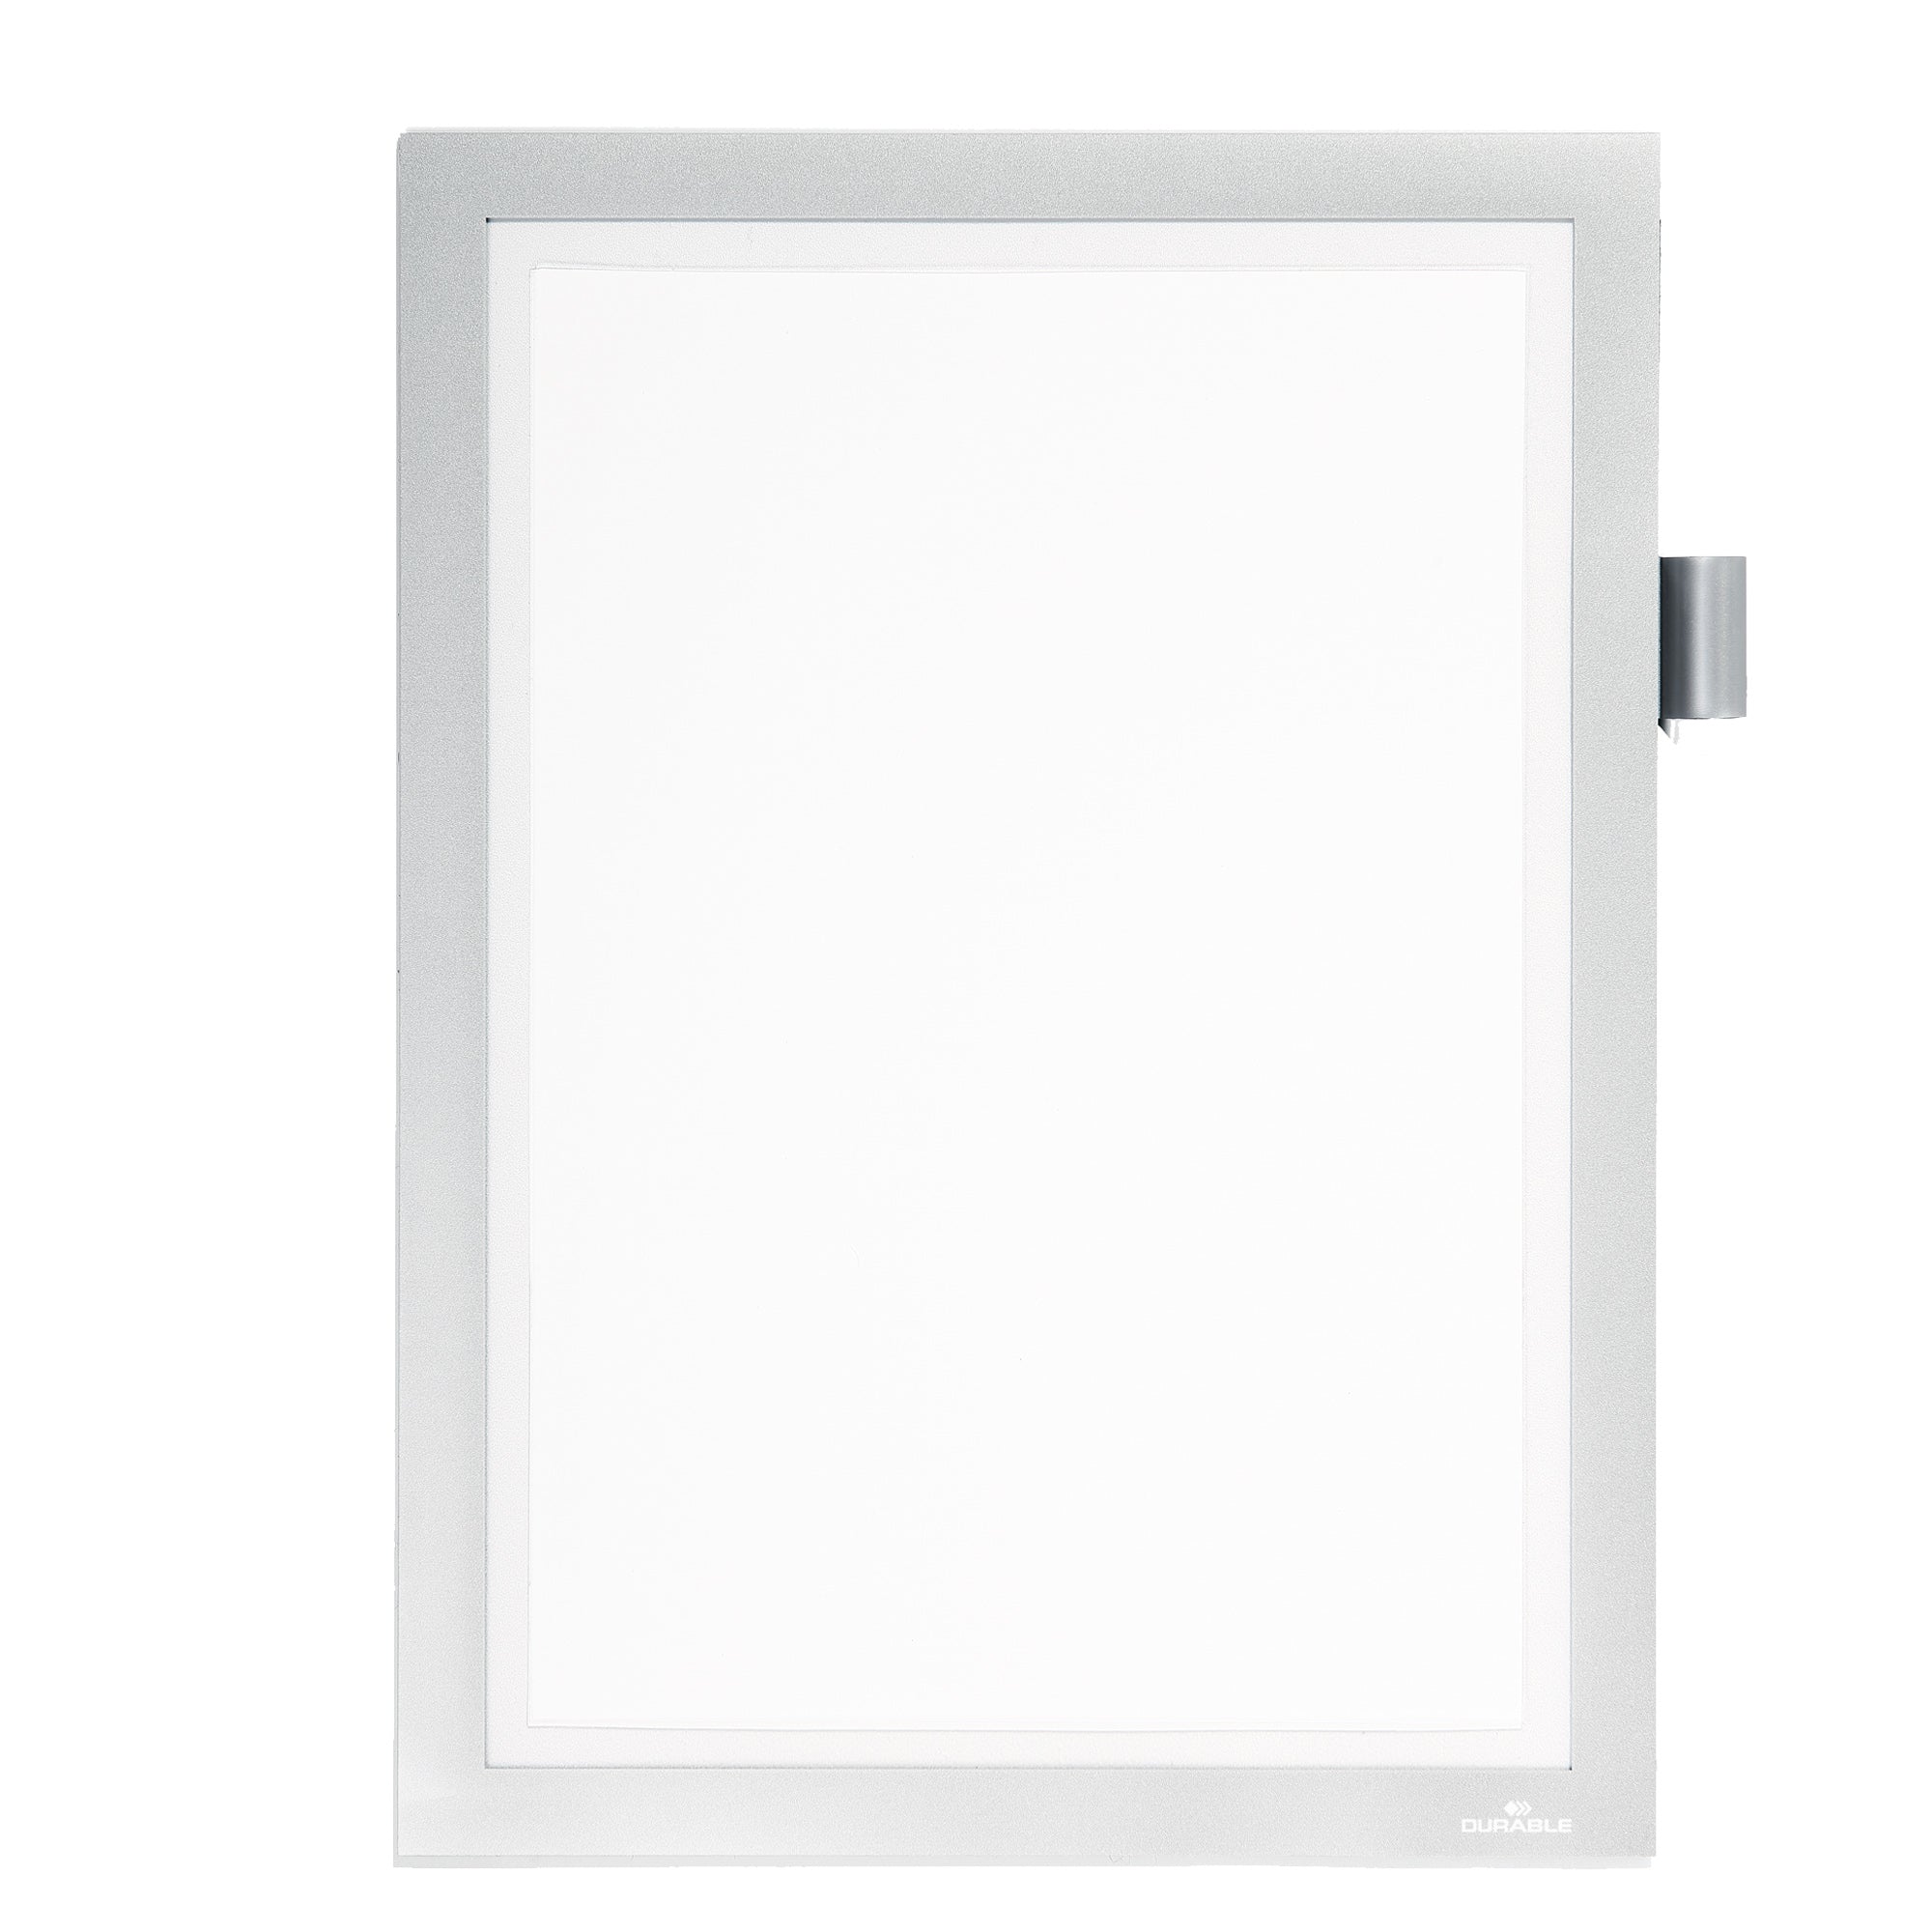 durable-cornice-magnetica-duraframe-note-a4-21x29-7cm-argento